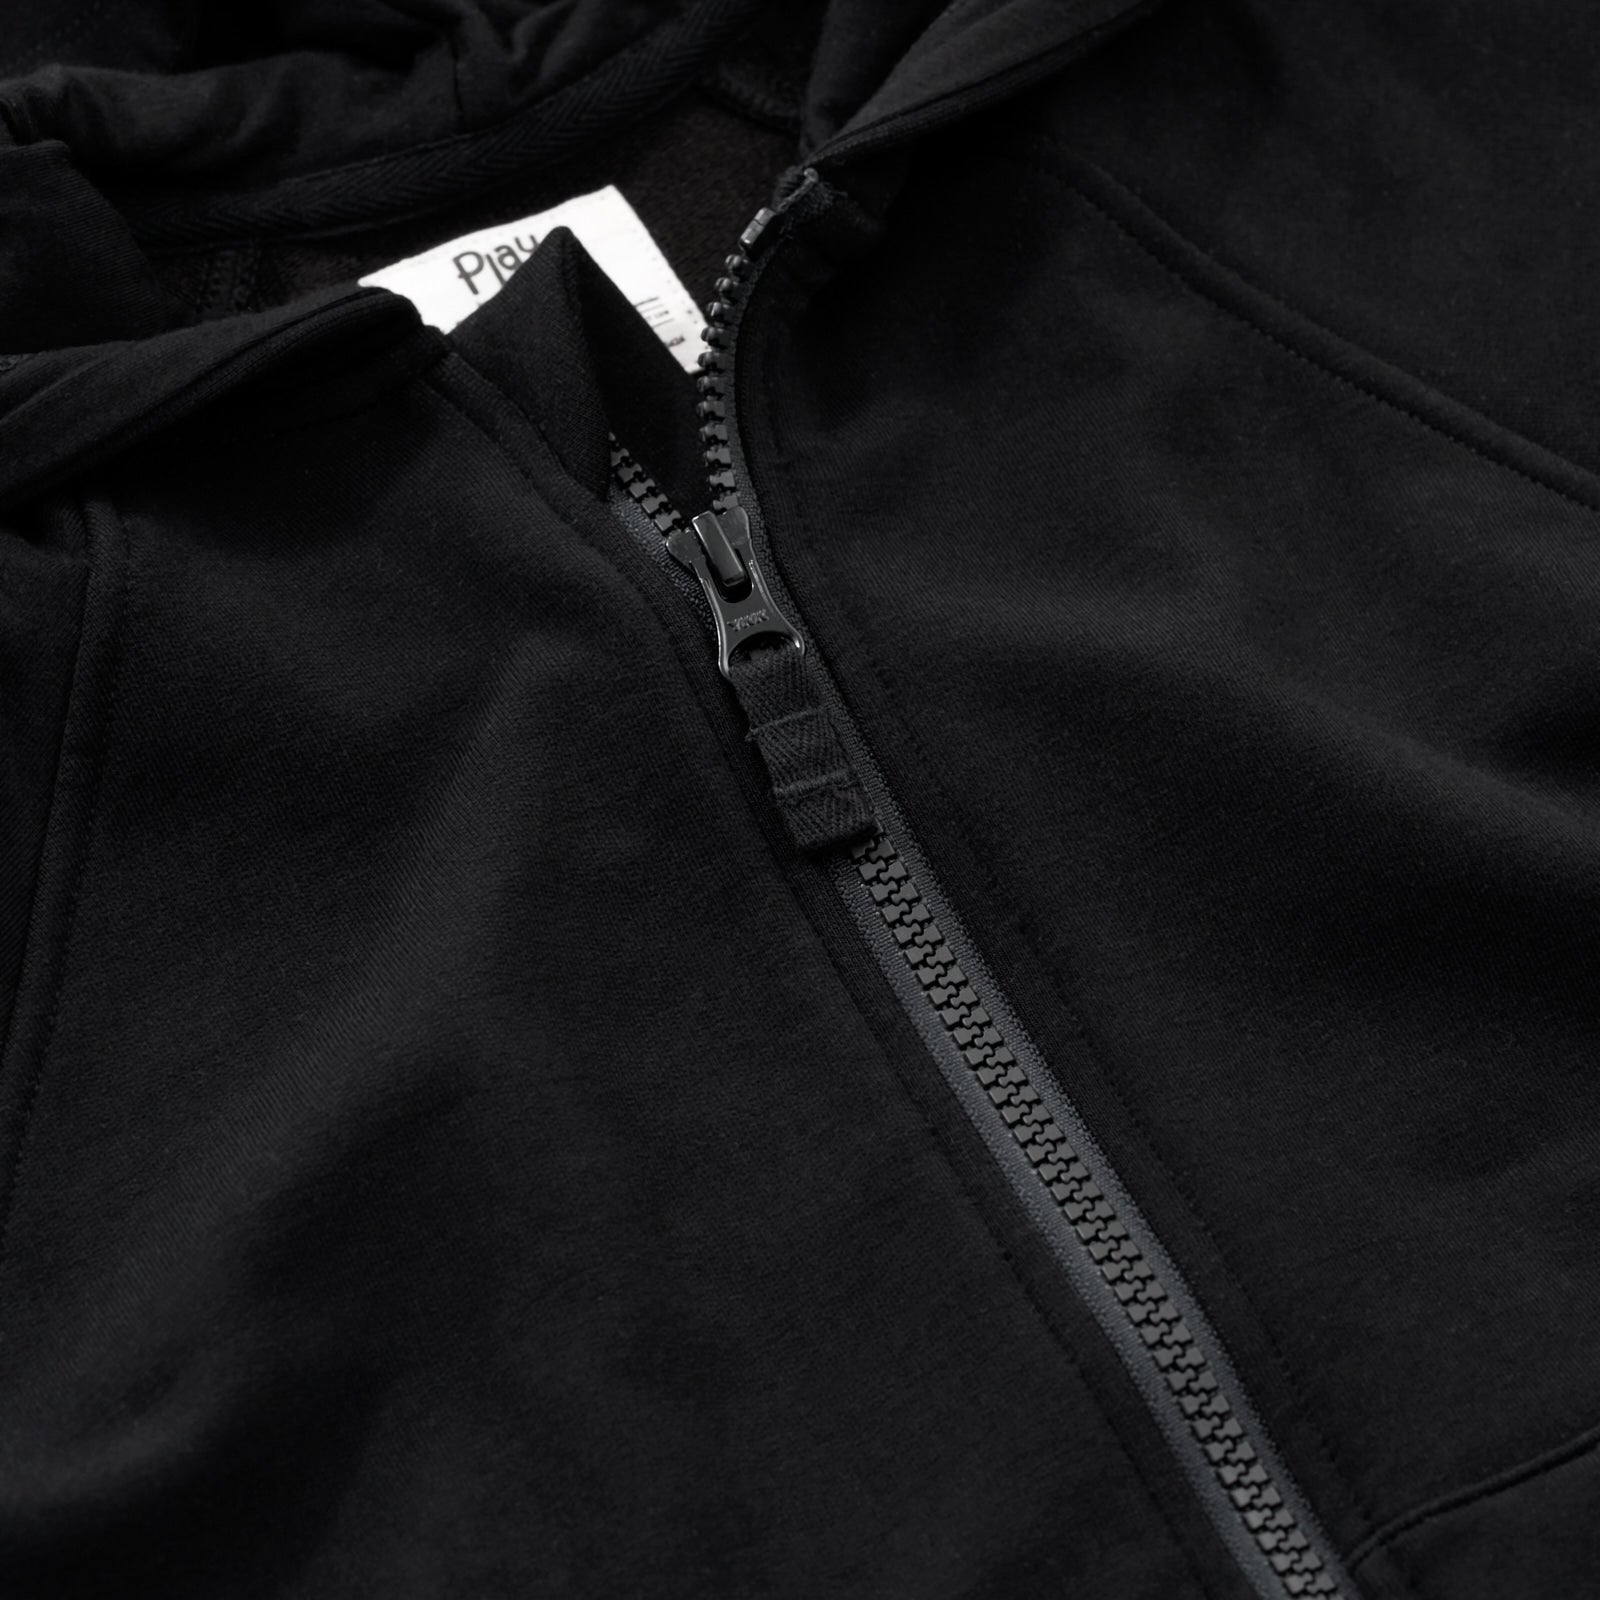 Close up flat lay image of the zipper detail on the Black Zip Hoodie